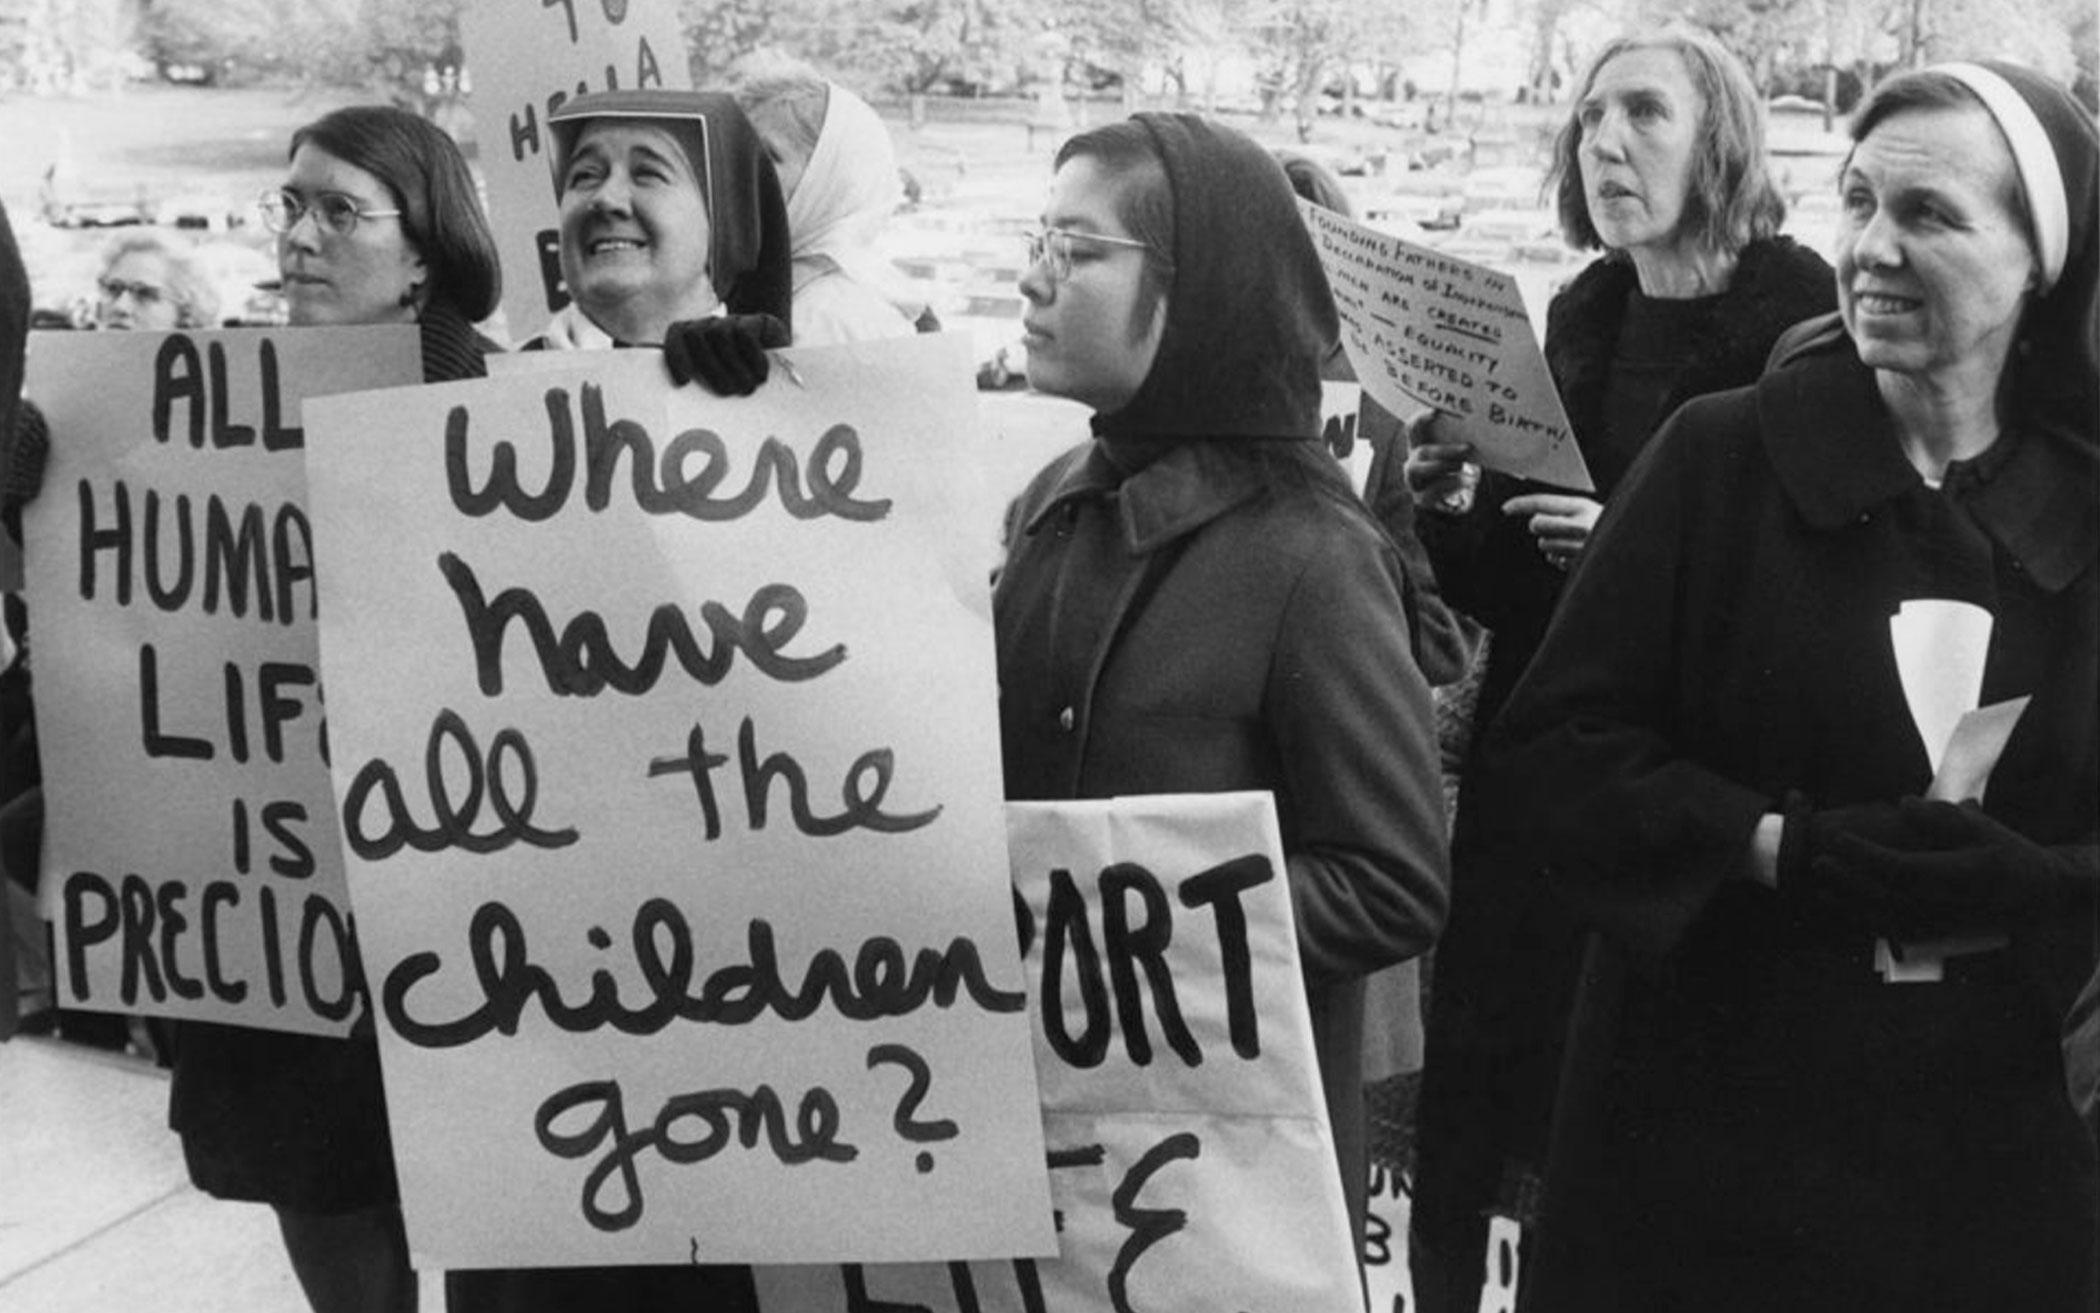 Several teaching nuns from Maryland communities carry placards as they participate in an anti-abortion rally at the east front of the Capitol Building in November 1971, in Washington. RNS archive photo. Photo courtesy of the Presbyterian Historical Society.